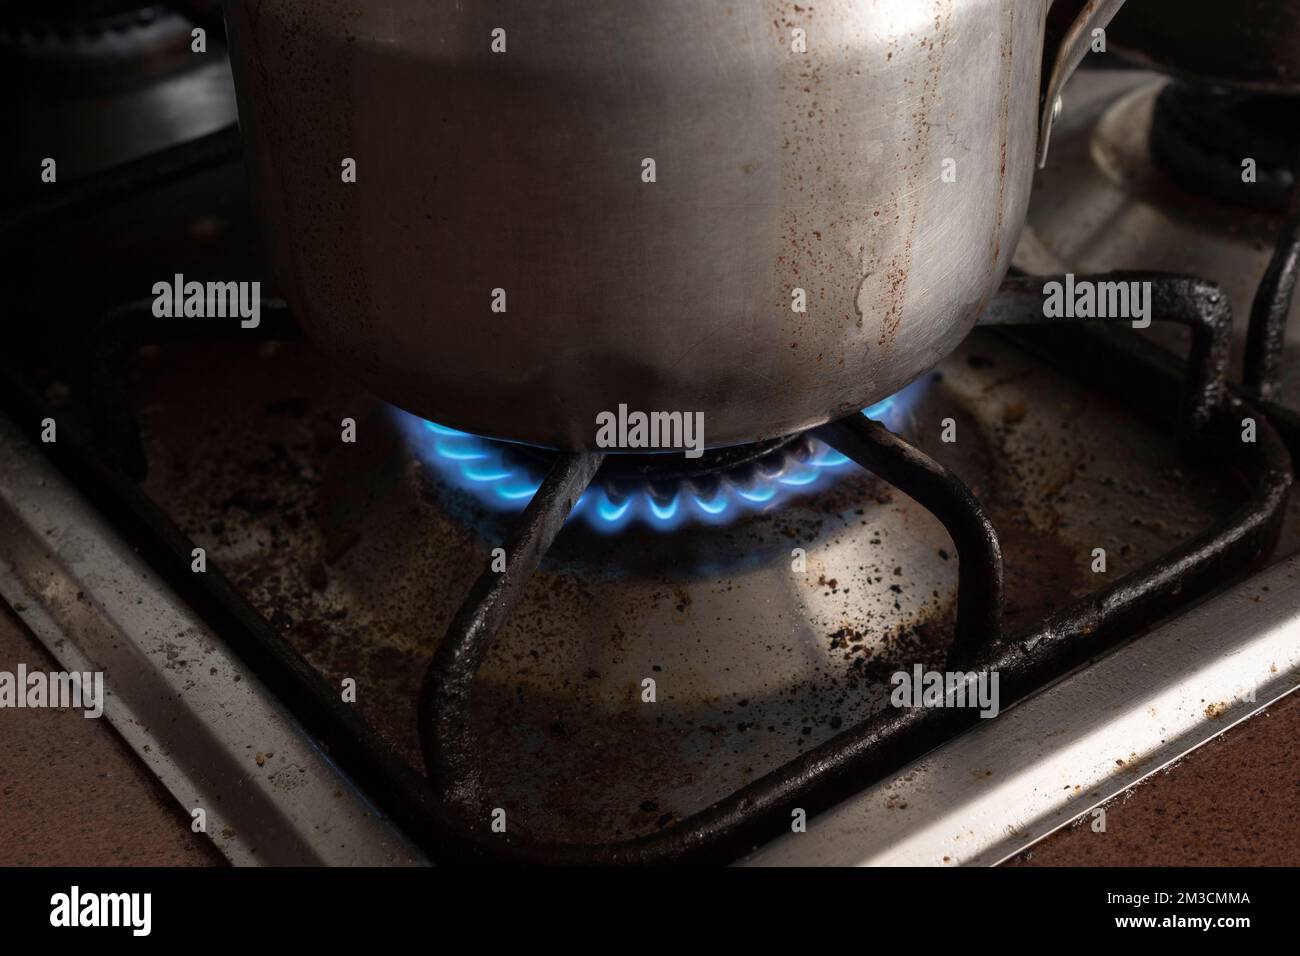 https://c8.alamy.com/comp/2M3CMMA/closeup-to-a-dirty-natural-gas-stove-on-with-dirty-cocoa-cooking-pot-over-a-flame-cooking-traditional-concept-2M3CMMA.jpg